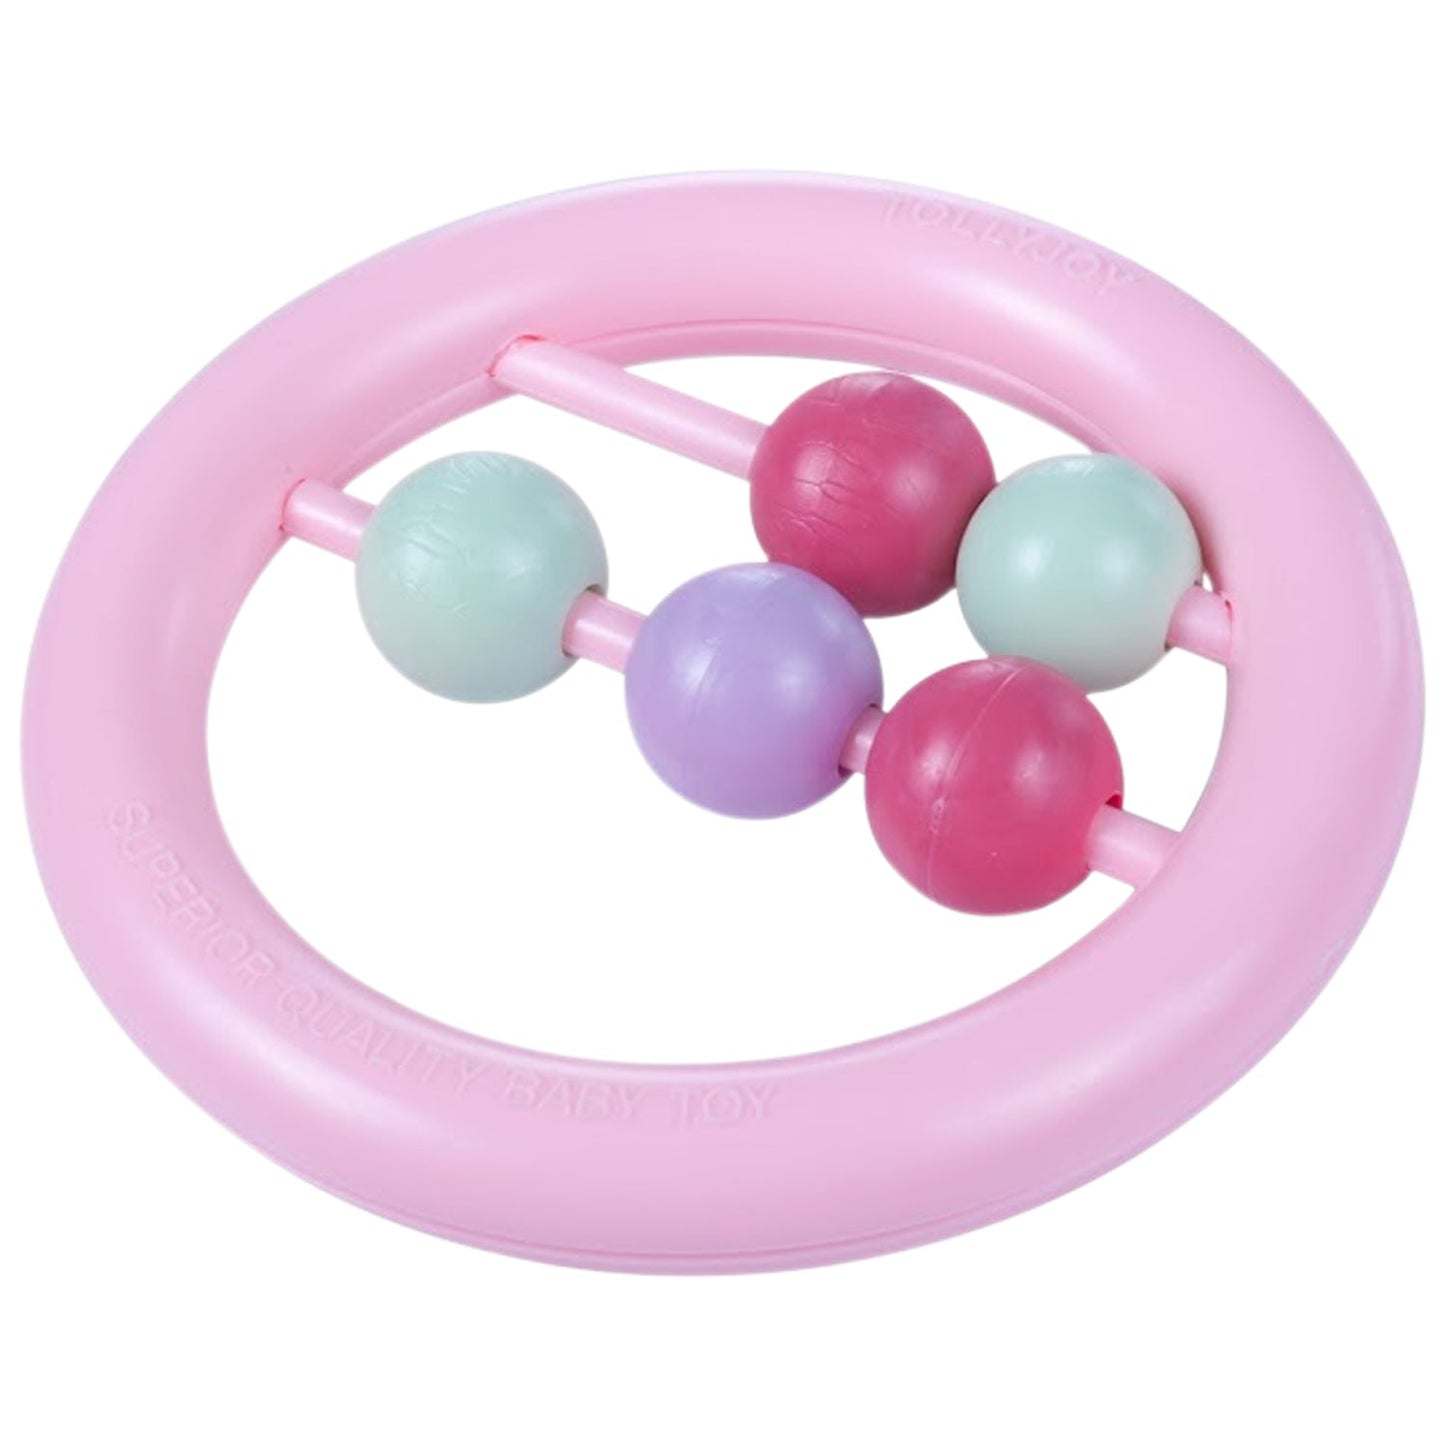 'O' Shaped Rattle~Pink(Without Packing)